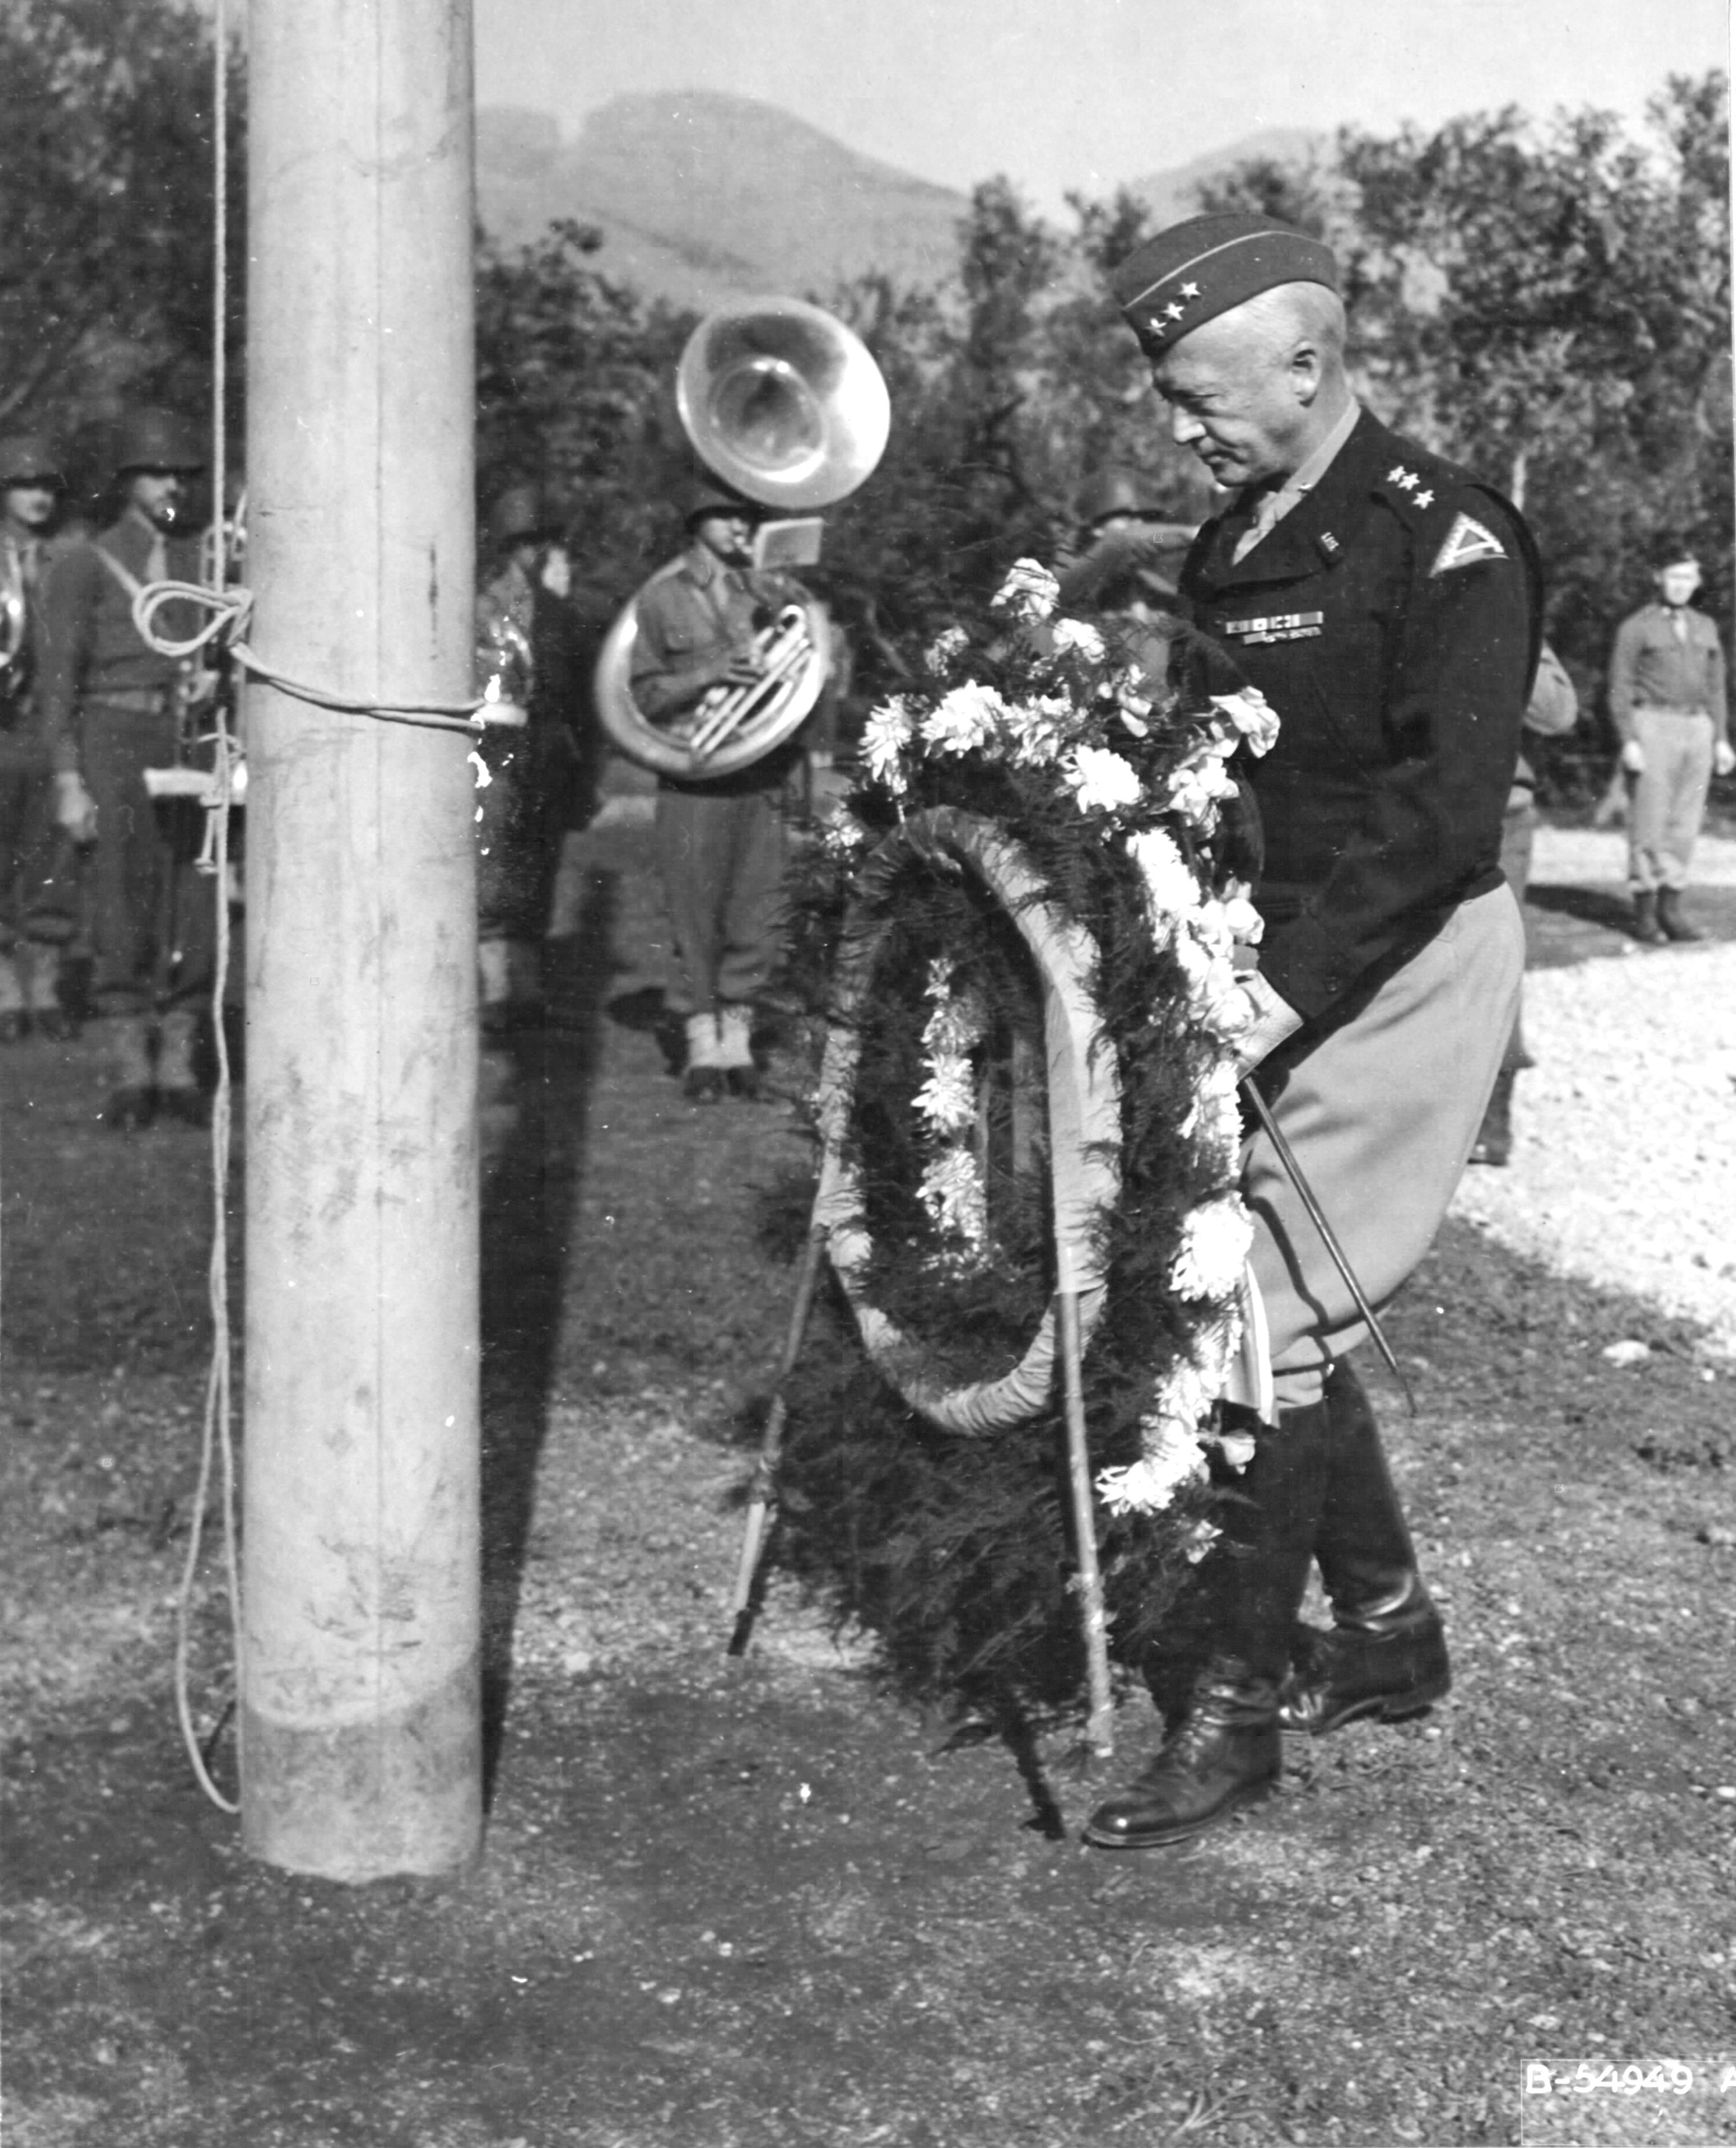 United States Army LtGen George Patton placing a wreath at the Palermo American War Cemetery, Palermo, Sicily on 11 Nov 1943 during World War I Armistice Day ceremonies.